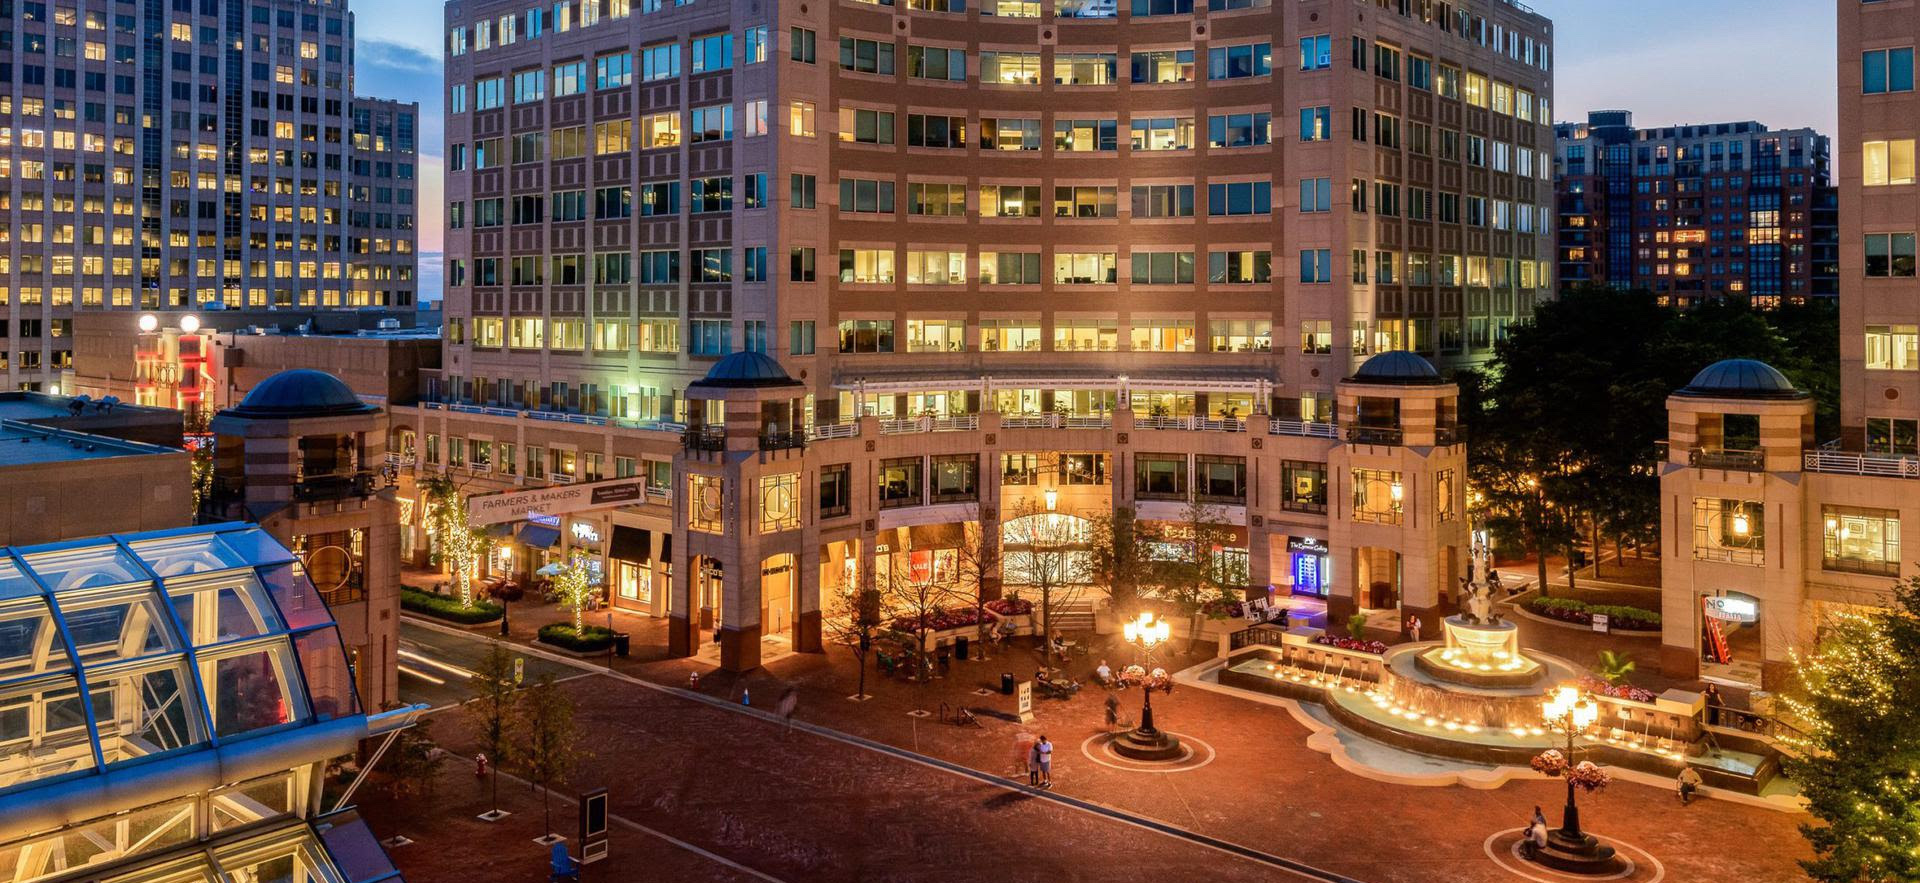 Join us for our walking tour of Reston Town Center! Coalition For